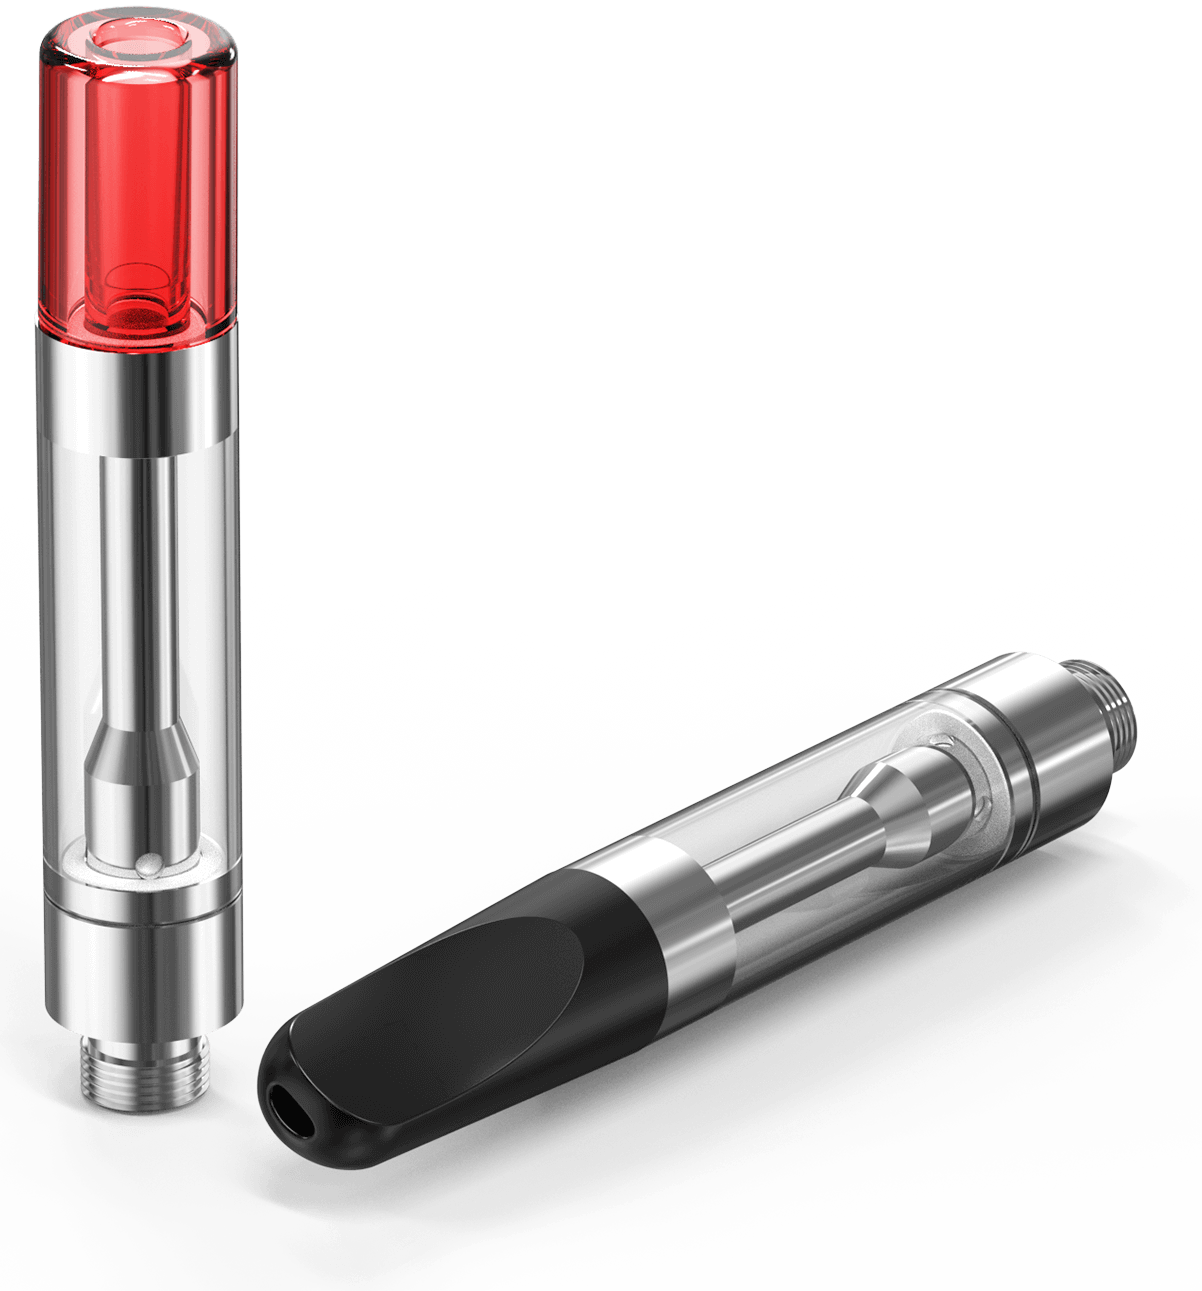 P510 (Polycarbonate 510 Thread Cartridge) - Red Translucent Barrel Tip and a Black Opaque Duckbill Tip (1)